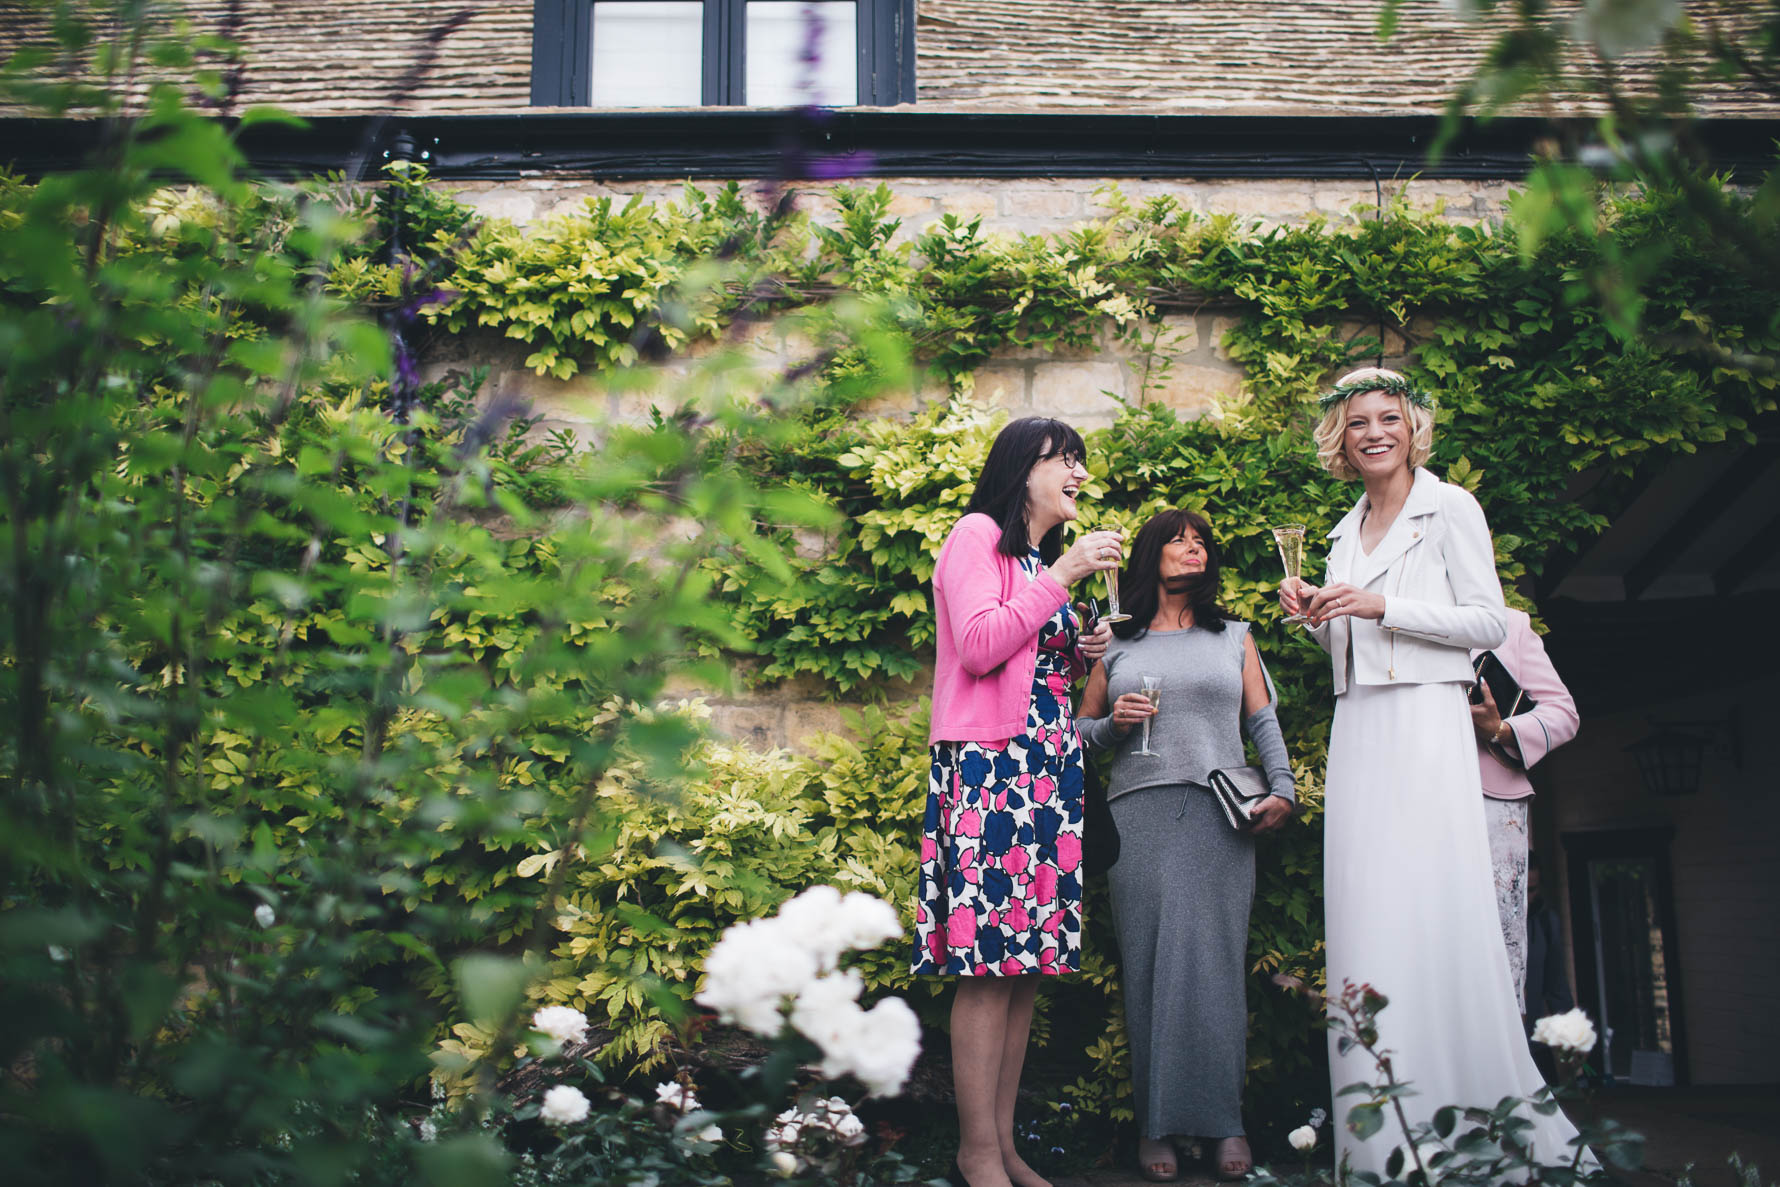 Bride wearing a white jacket stood outside a stone building covered in ivy along with three female wedding guests also holding glasses of champagne